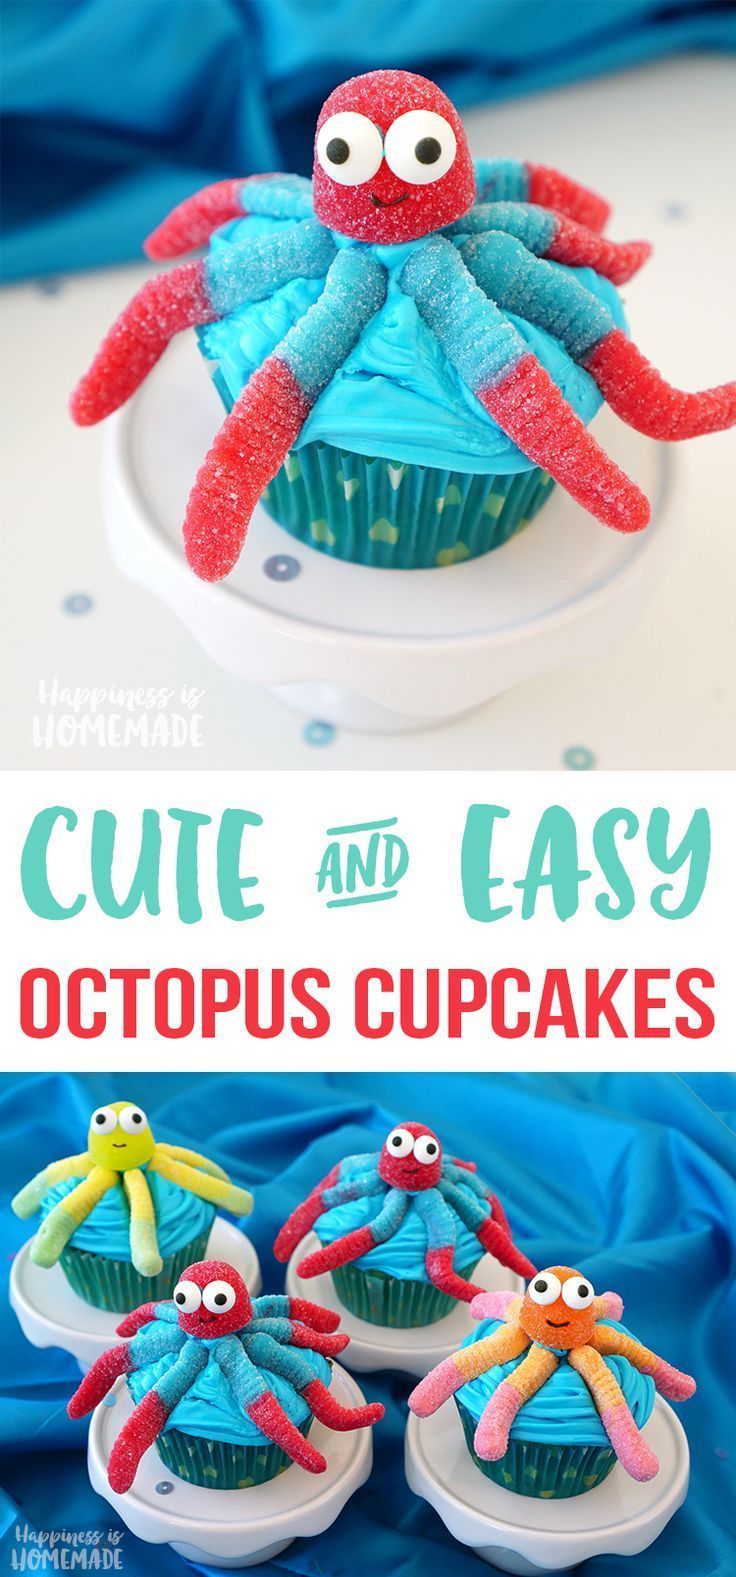 Super Cute Octopus Cupcakes – these quick and easy octopus cupcakes are perfect for your next Finding Dory or Nemo party! Cute for